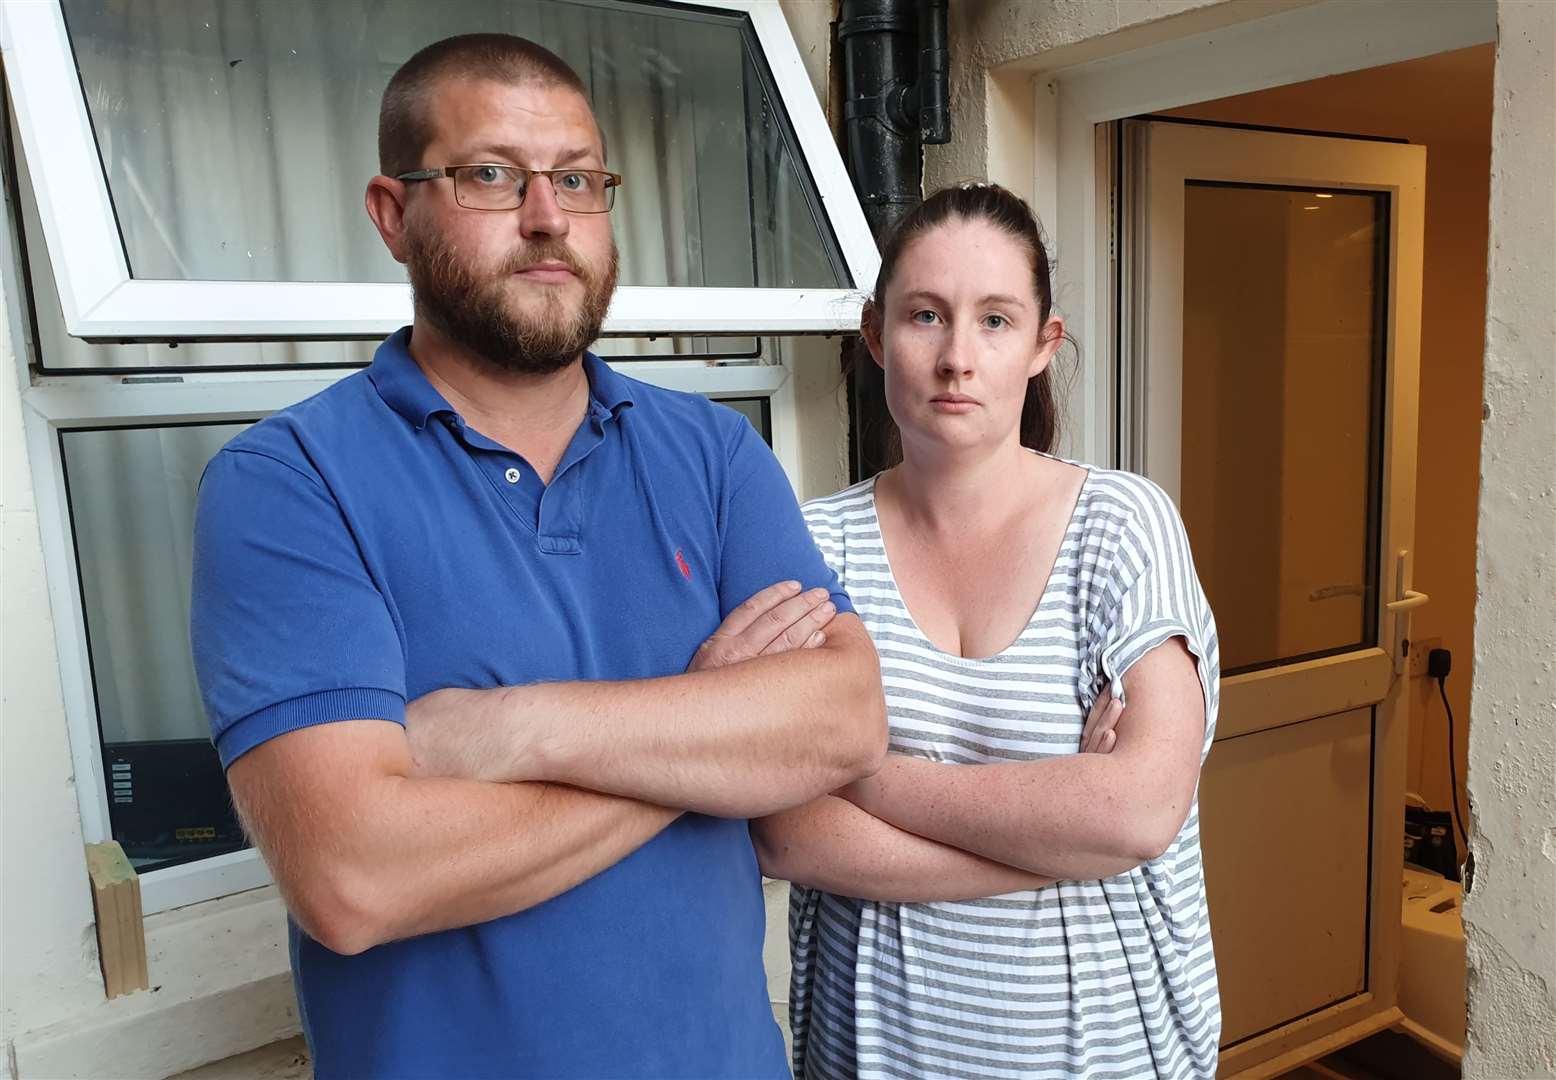 Tony King and Frances Spanner's home was flooded with sewage